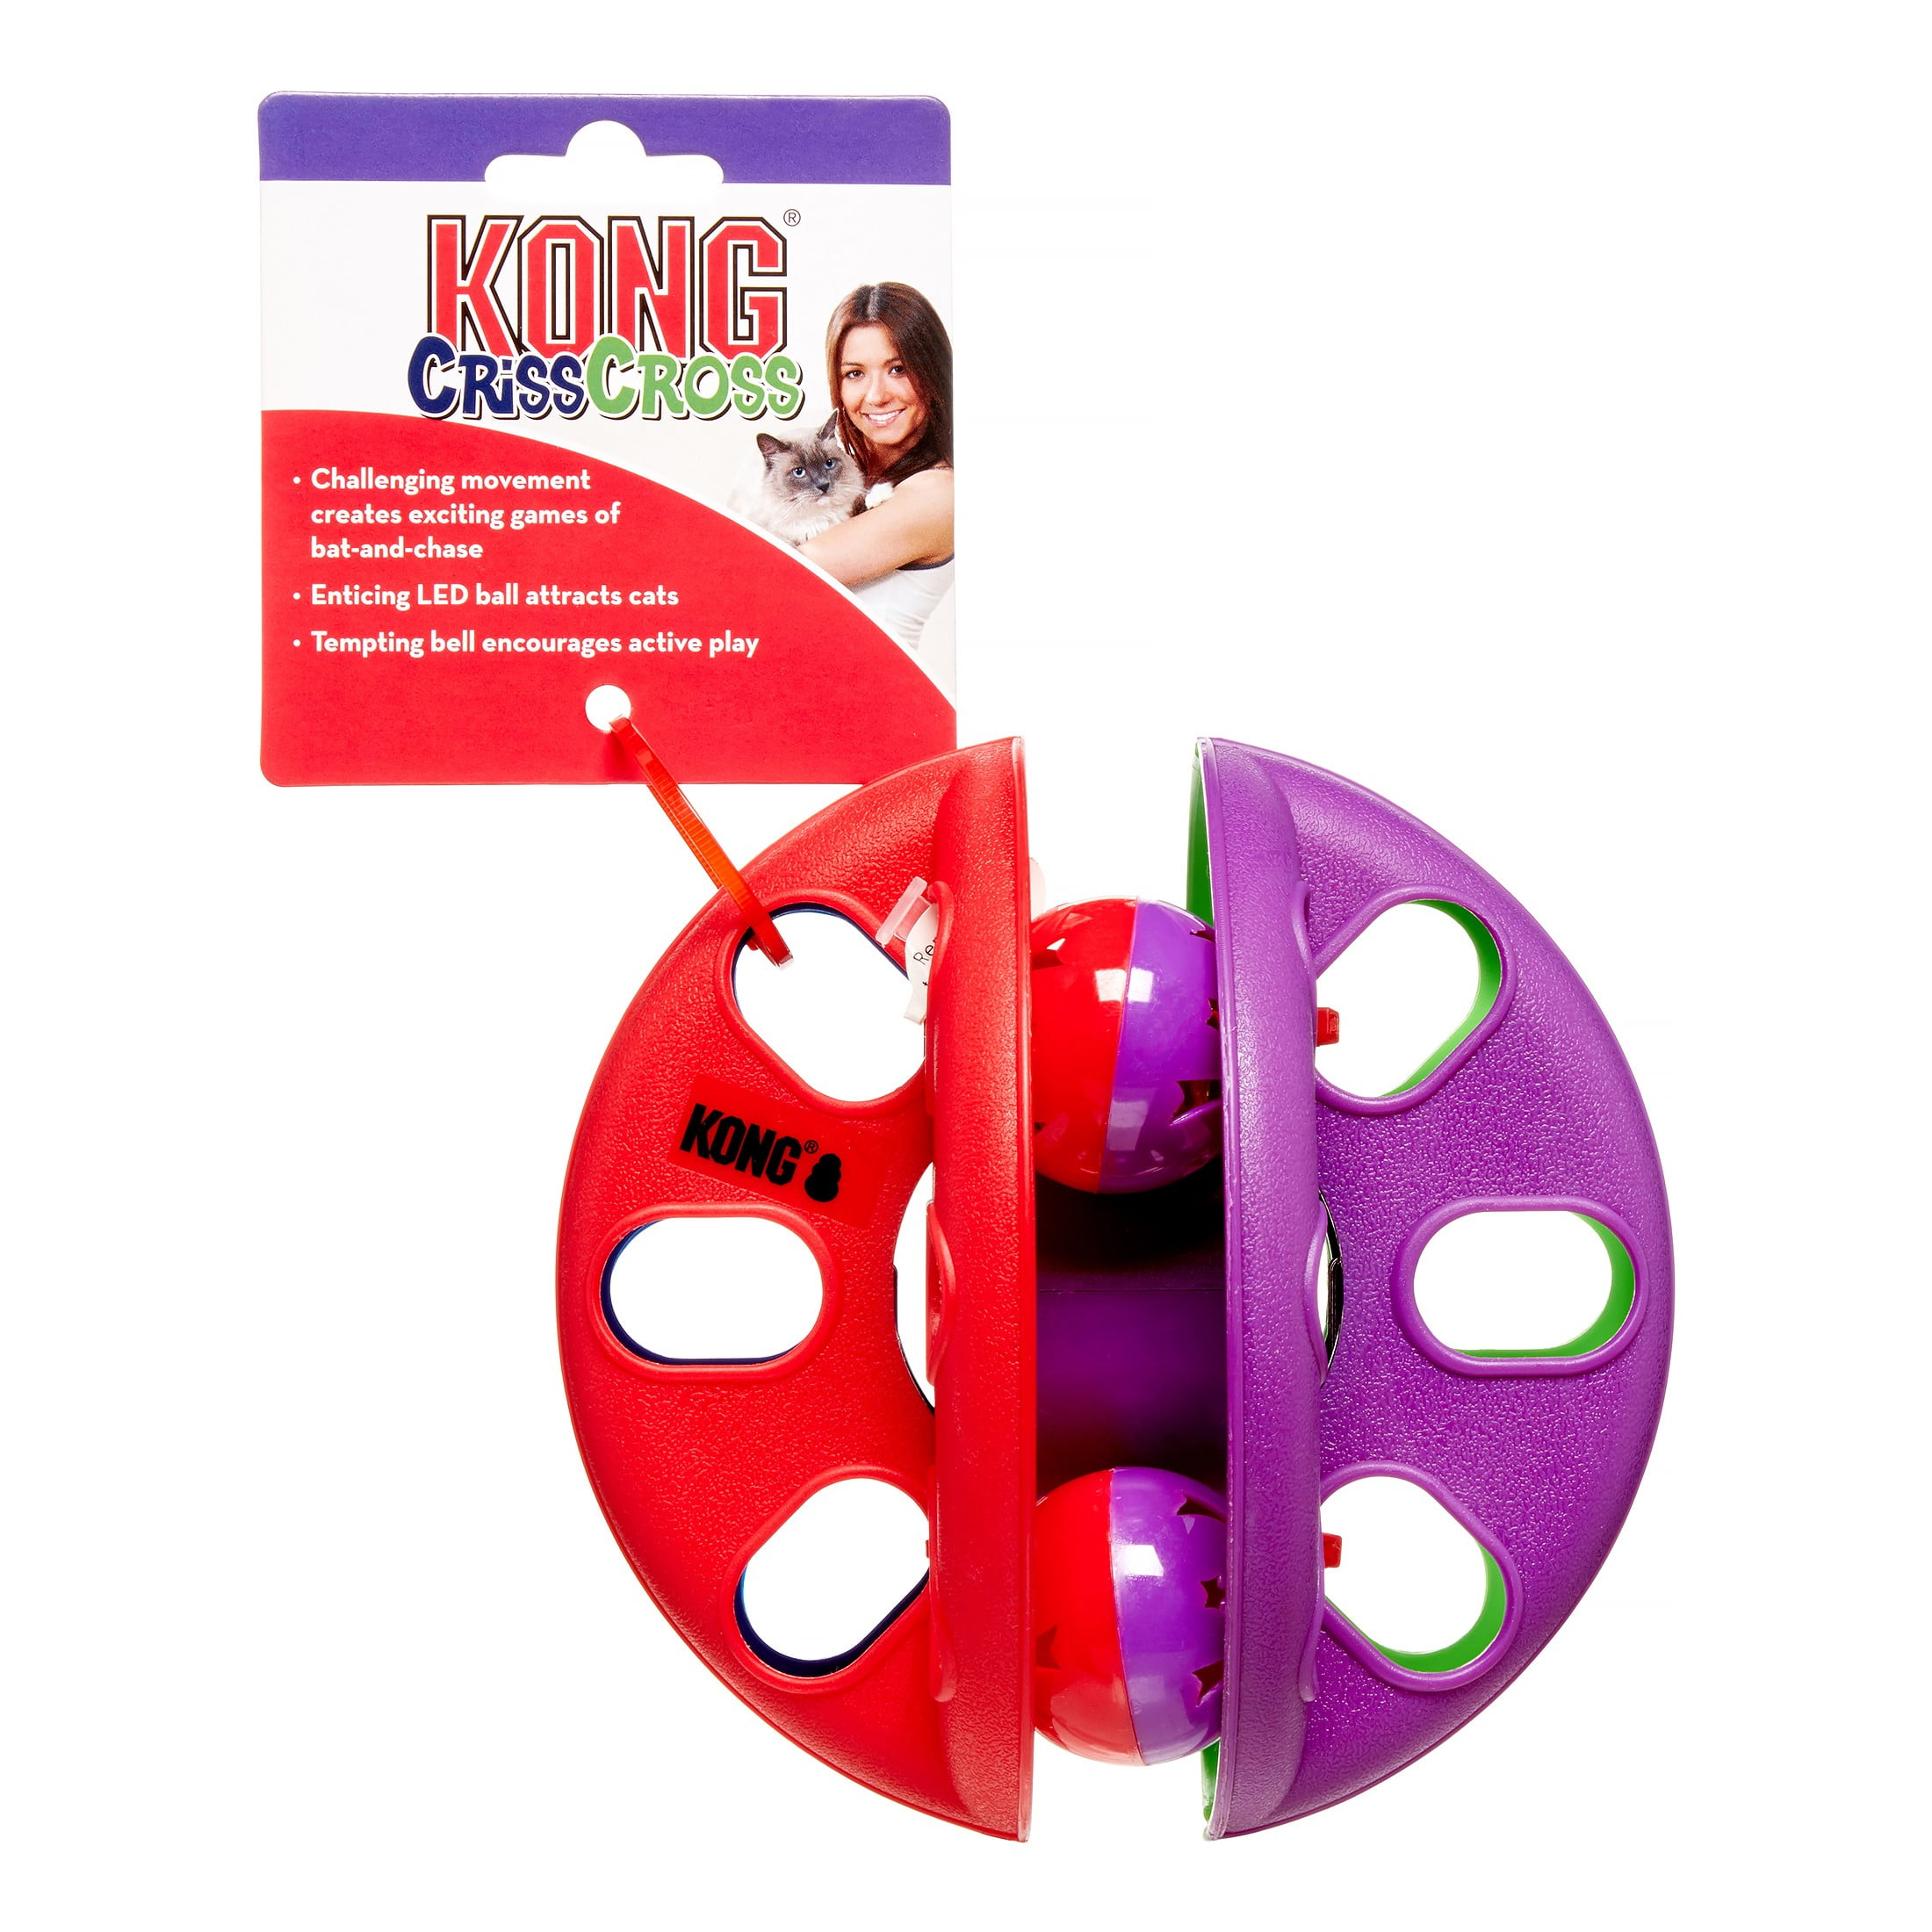 KONG Crisscross Cat Toy With Led Ball Multicolored, Medium